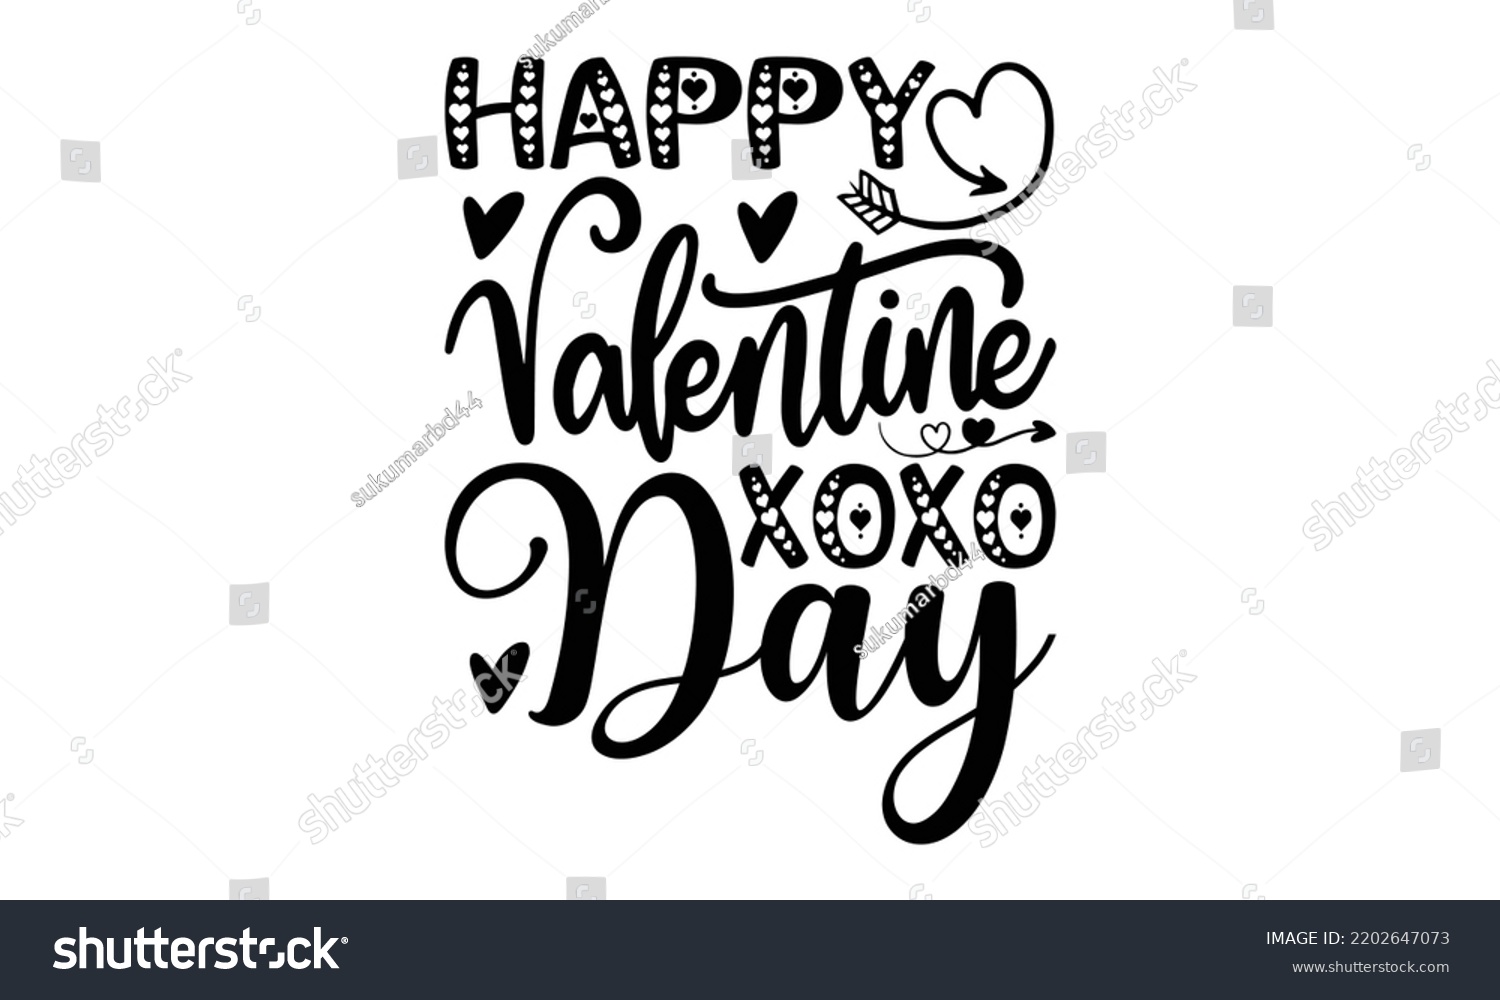 SVG of Happy Valentines Xoxo Day - Valentine's Day 2023 quotes svg design, Hand drawn vintage hand lettering, This illustration can be used as a print on t-shirts and bags, stationary or as a poster. svg